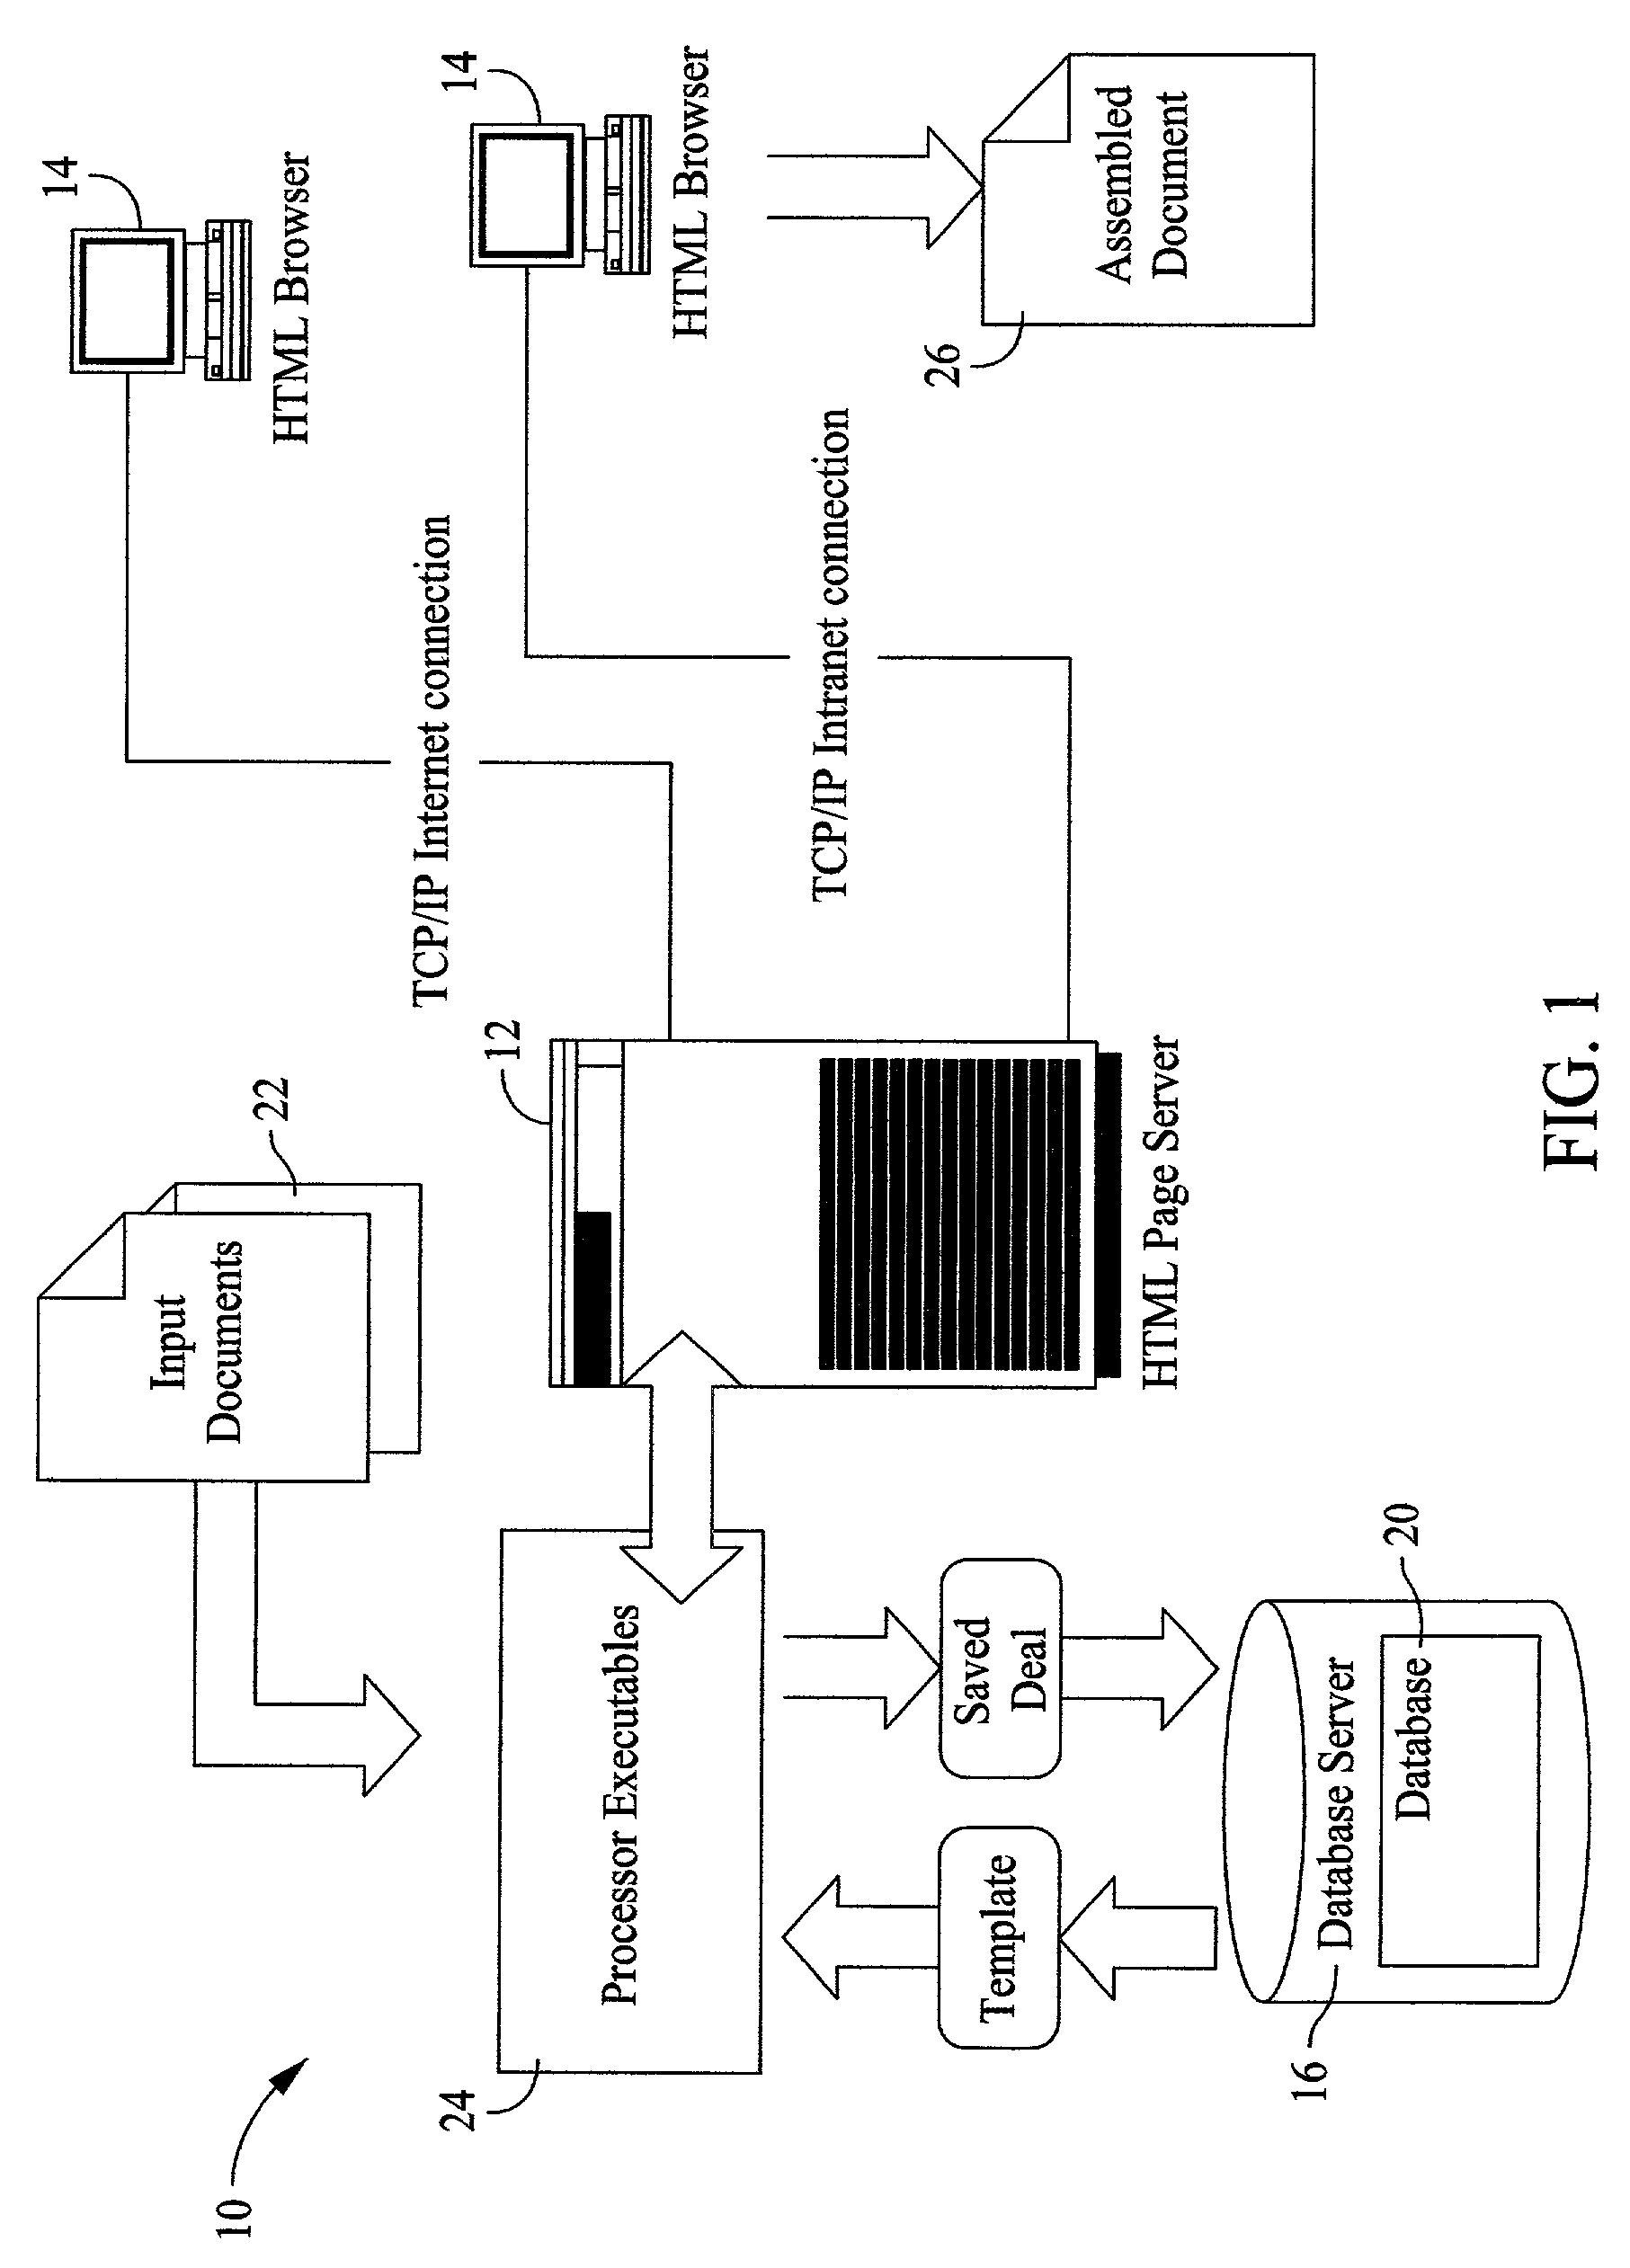 Methods and systems for generating documents